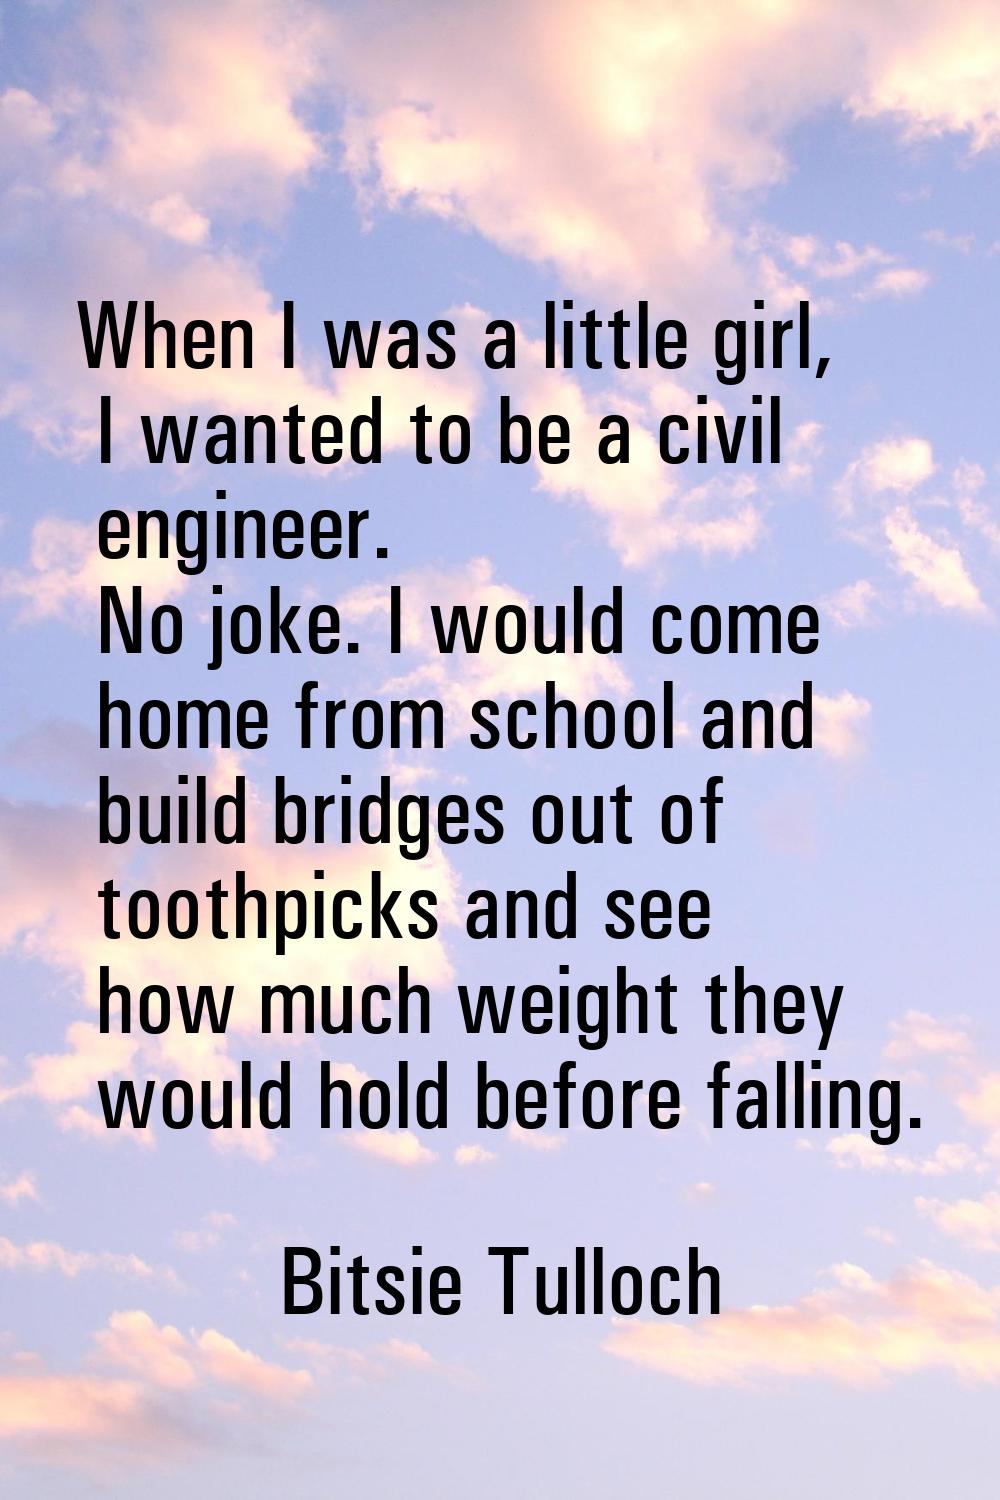 When I was a little girl, I wanted to be a civil engineer. No joke. I would come home from school a